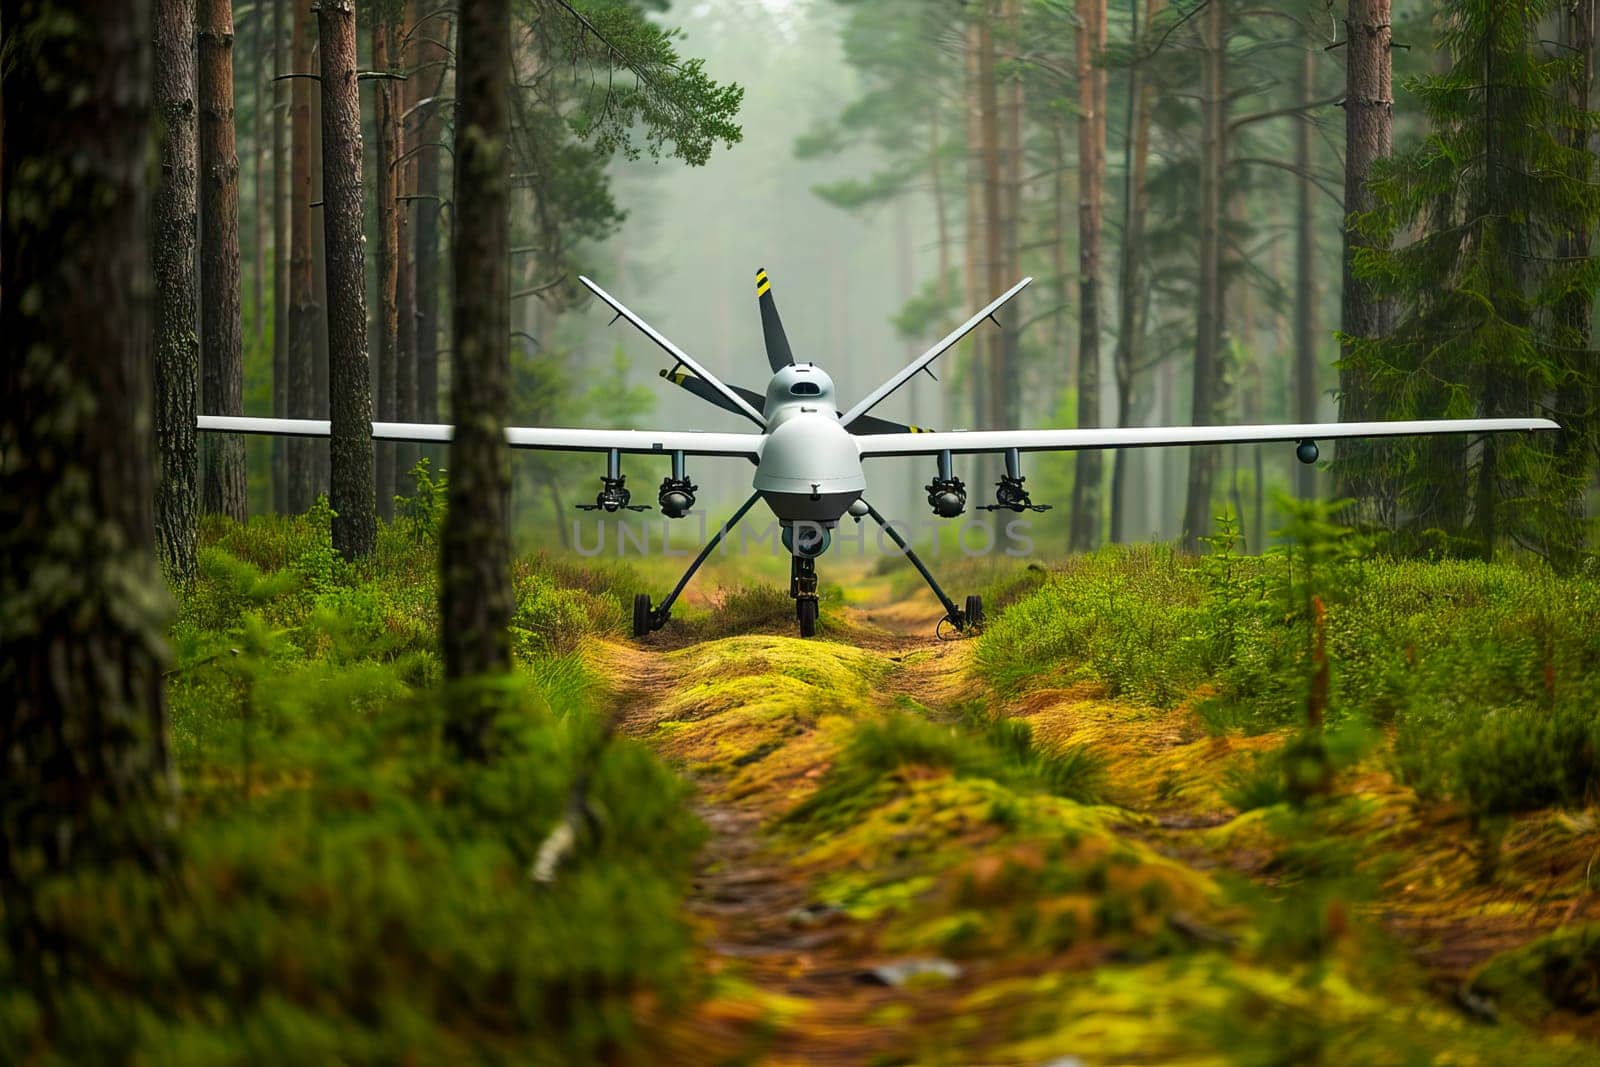 Military plane is parked in the dense forest surrounded by trees and foliage.